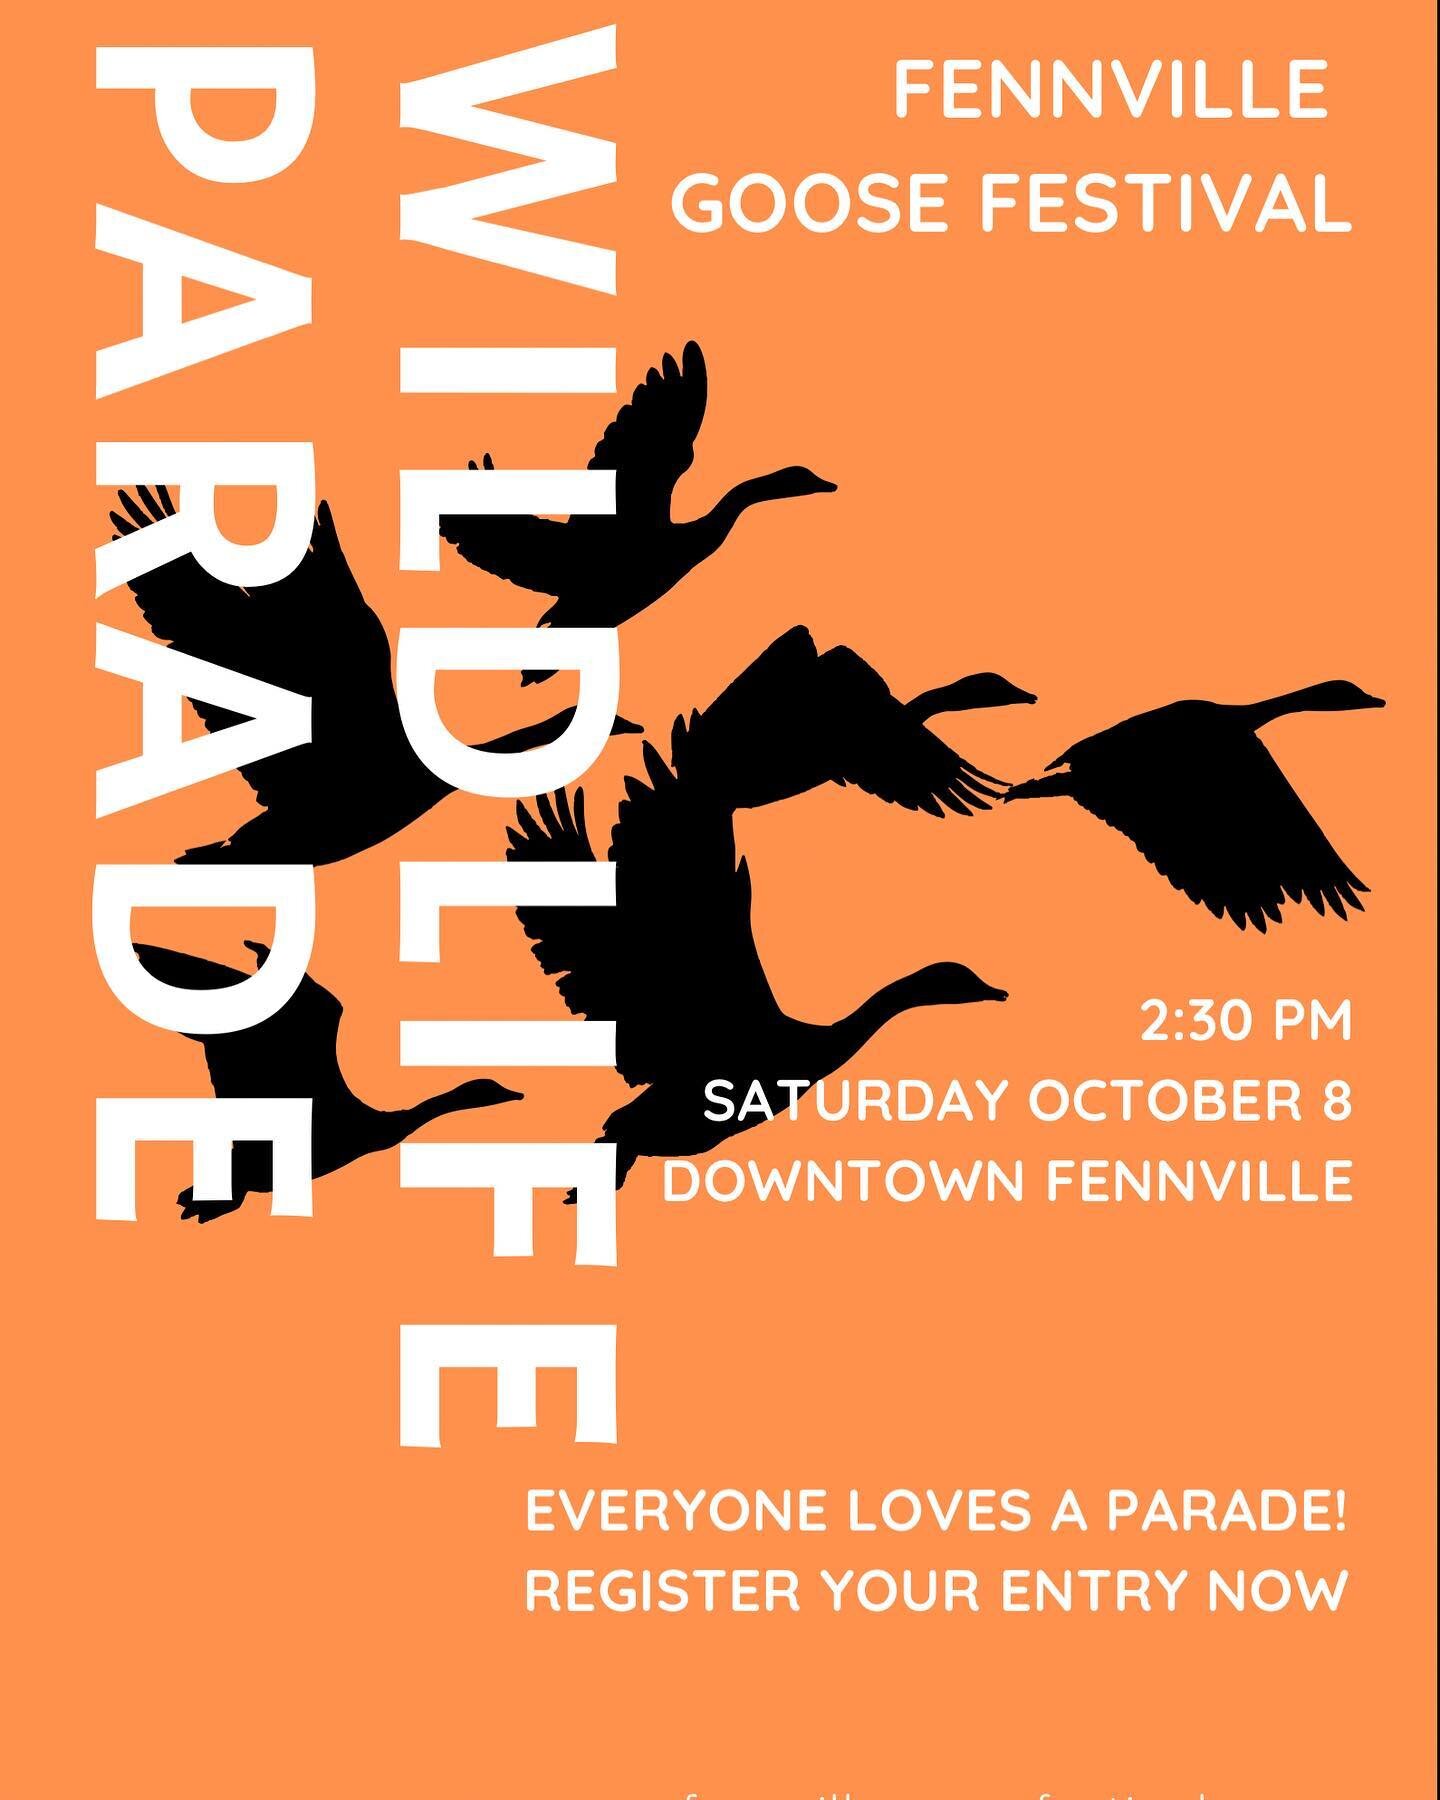 Let&rsquo;s make this parade amazing! Float, band, walking, bikes, horses&hellip;get your group together and register now for the Wildlife Parade&hellip;or is the Wild Life Parade&hellip;that&rsquo;s up to you🤷&zwj;♀️